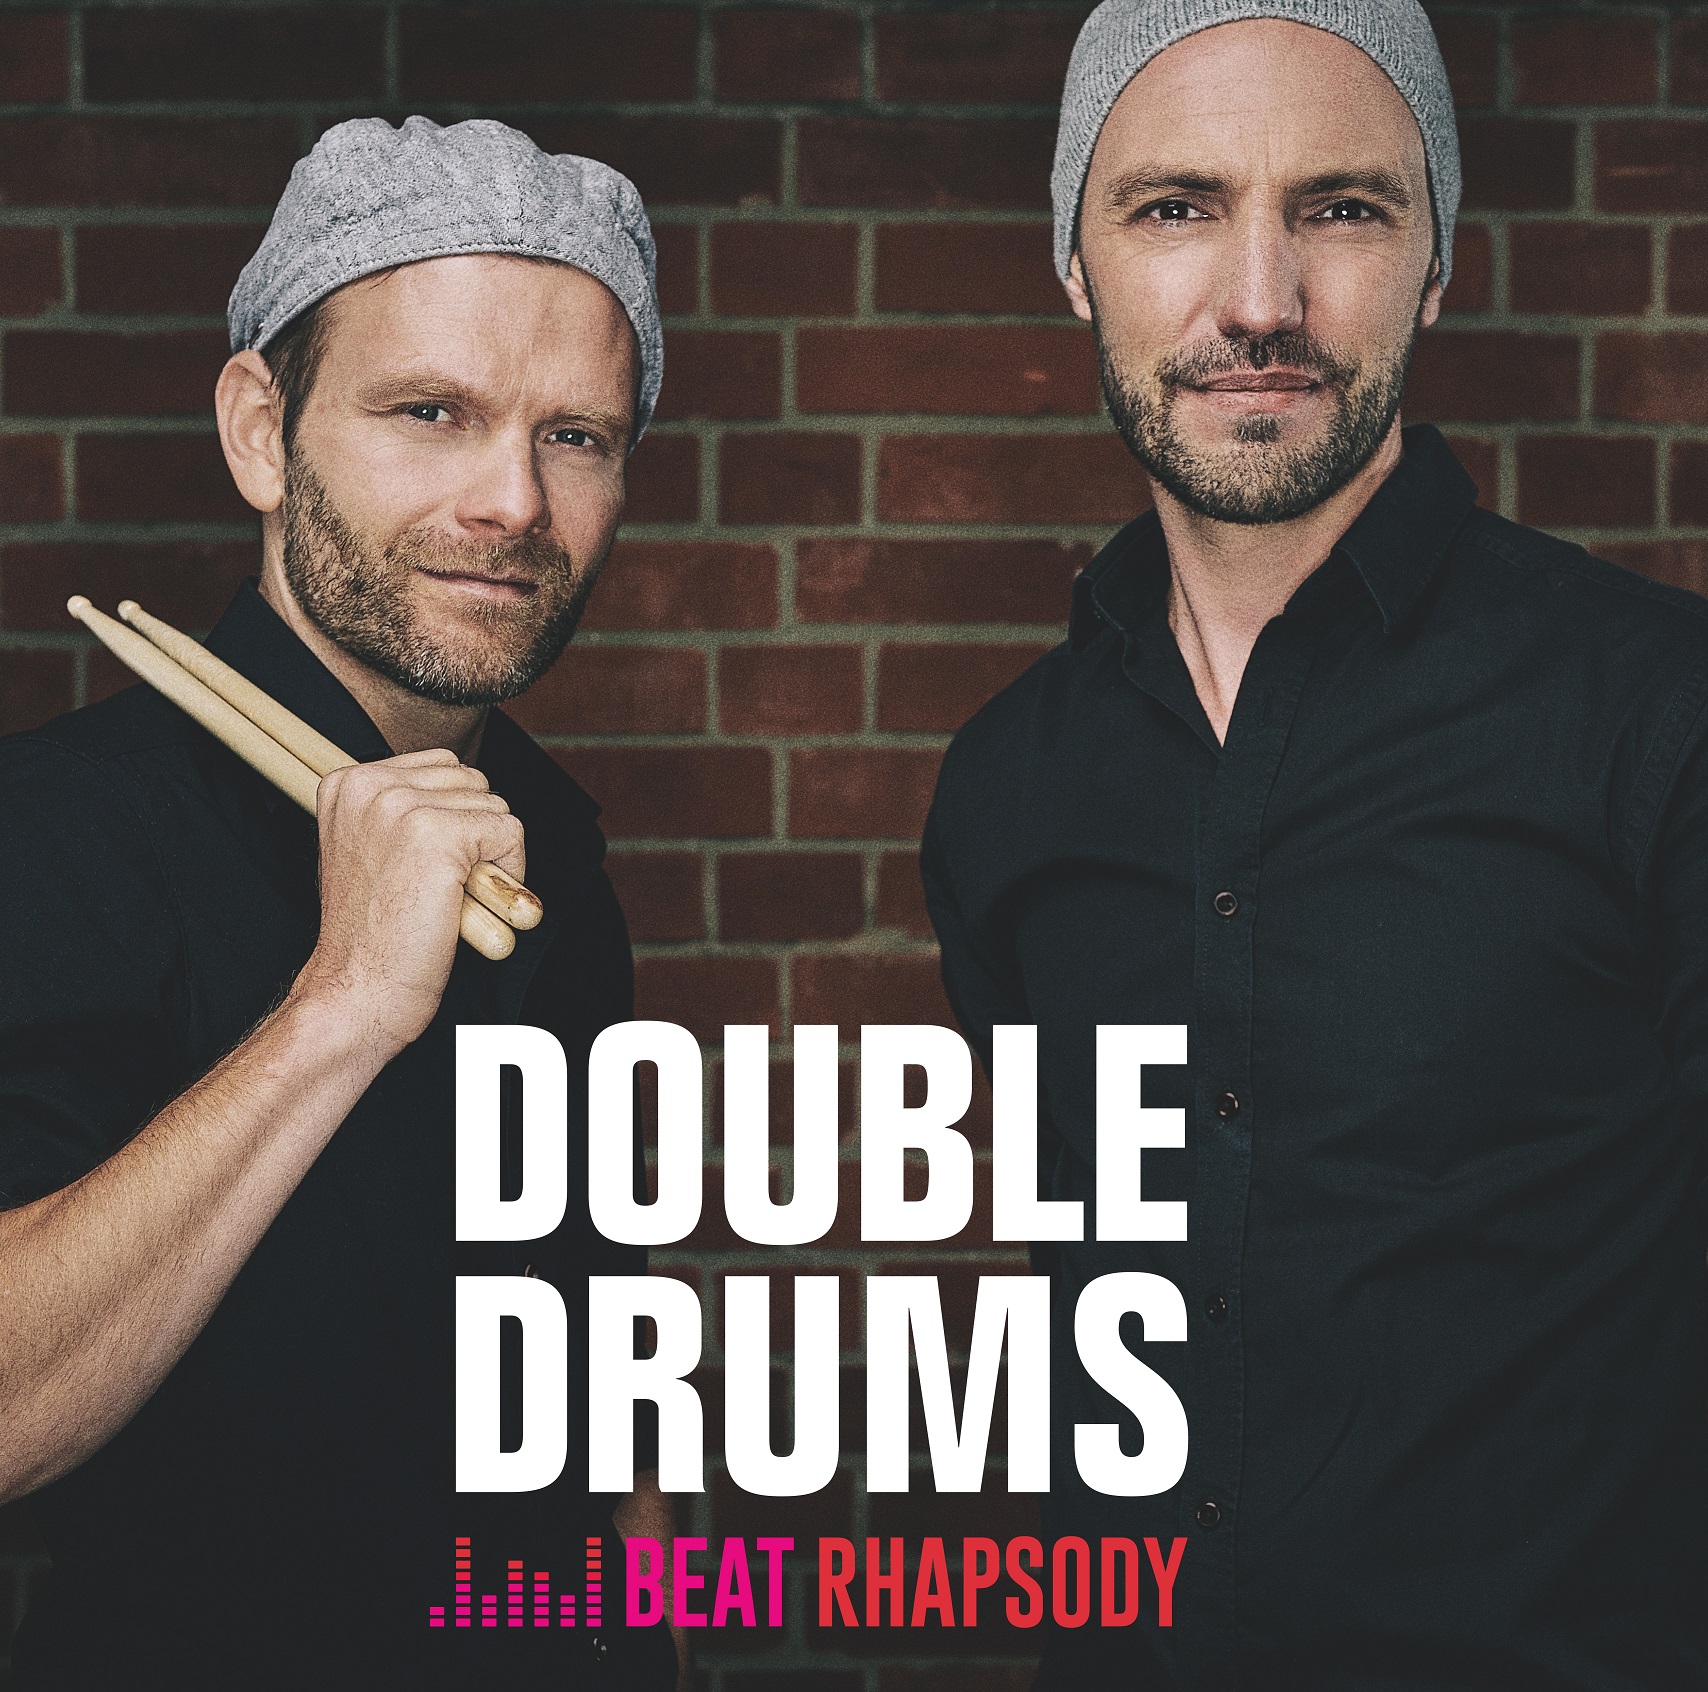 Double Drums